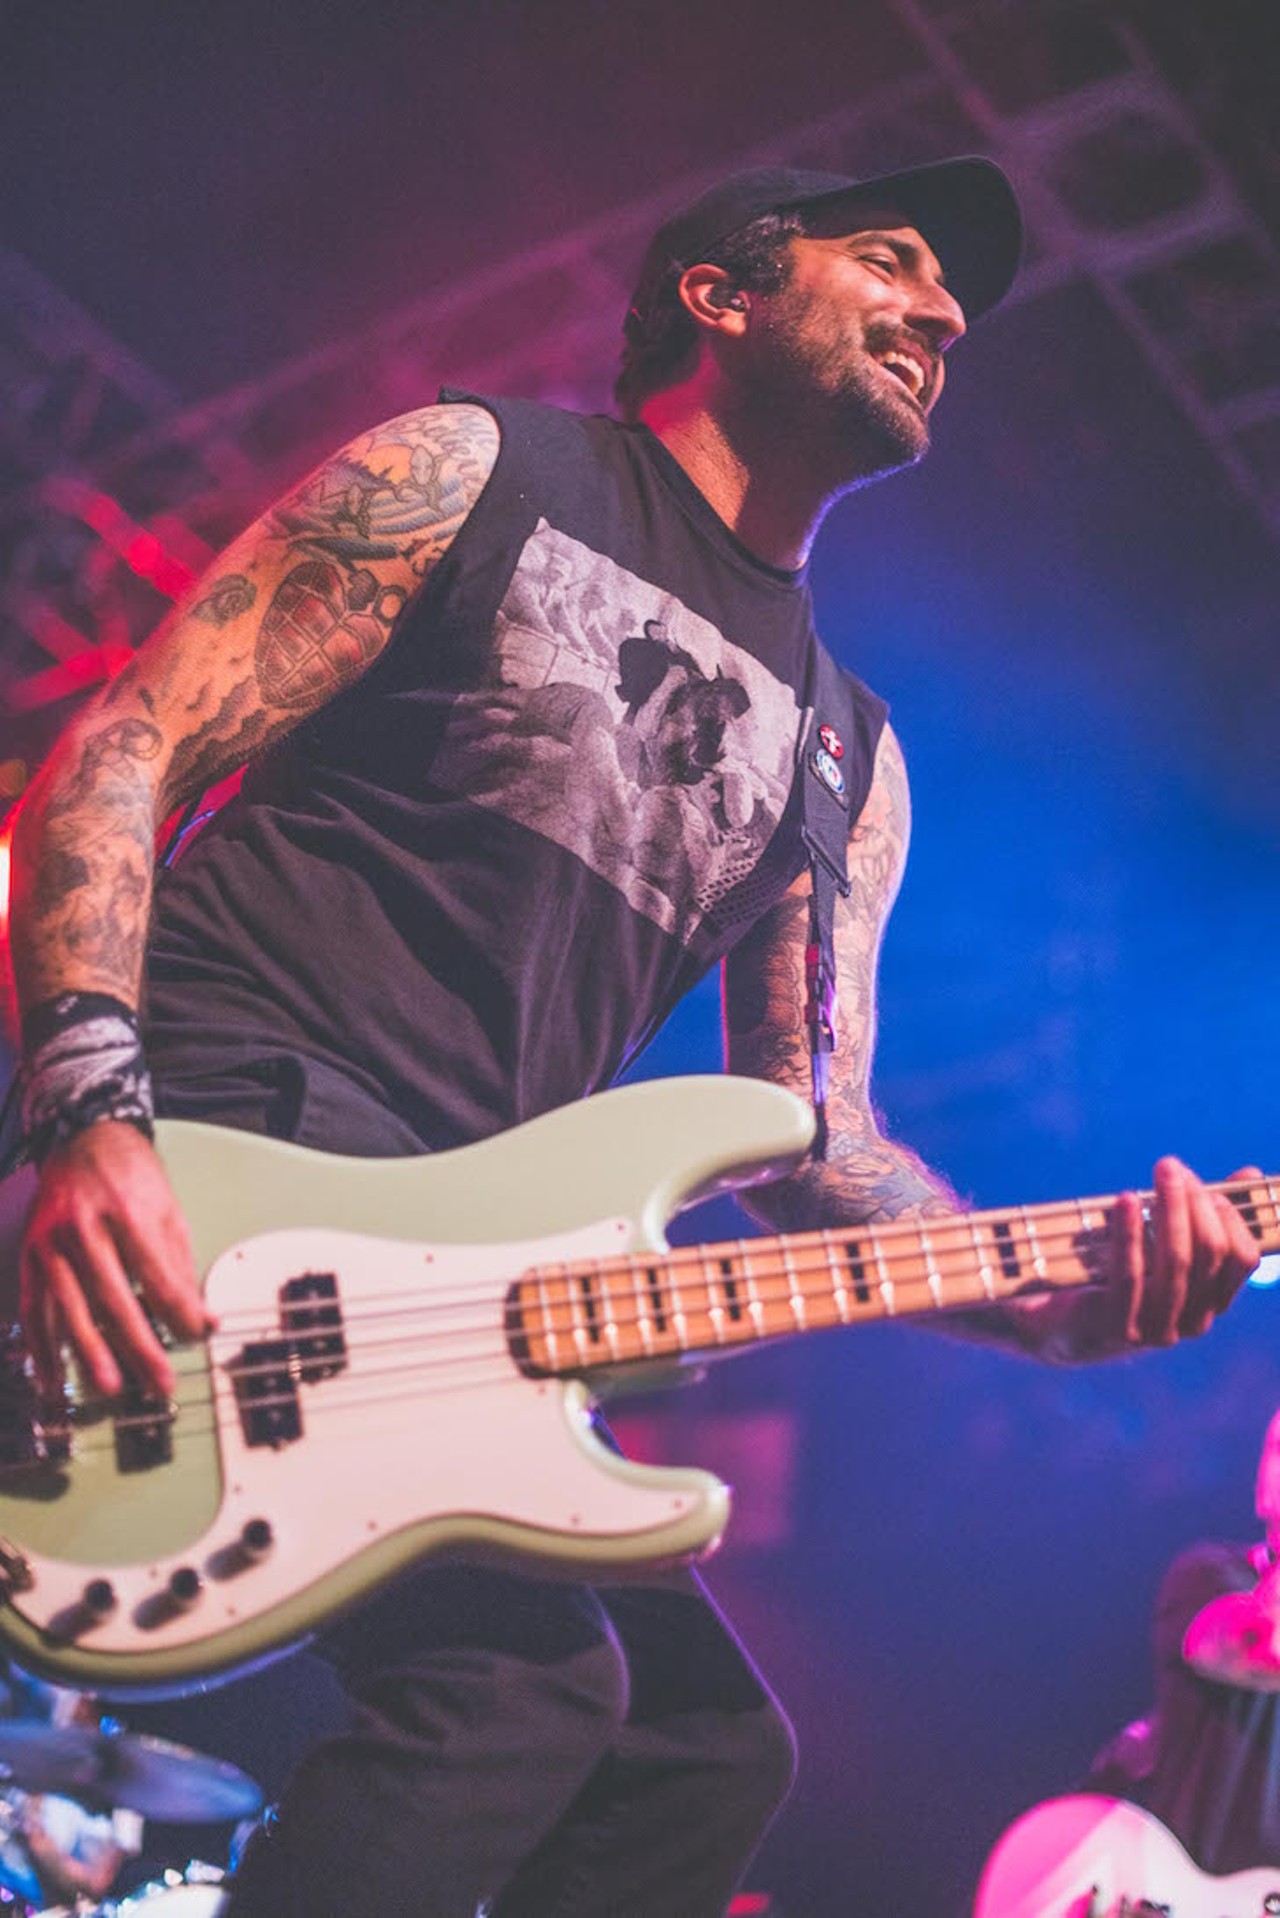 Photos from New Found Glory, Bayside, the Movieline and Ryan Keys at the House of Blues